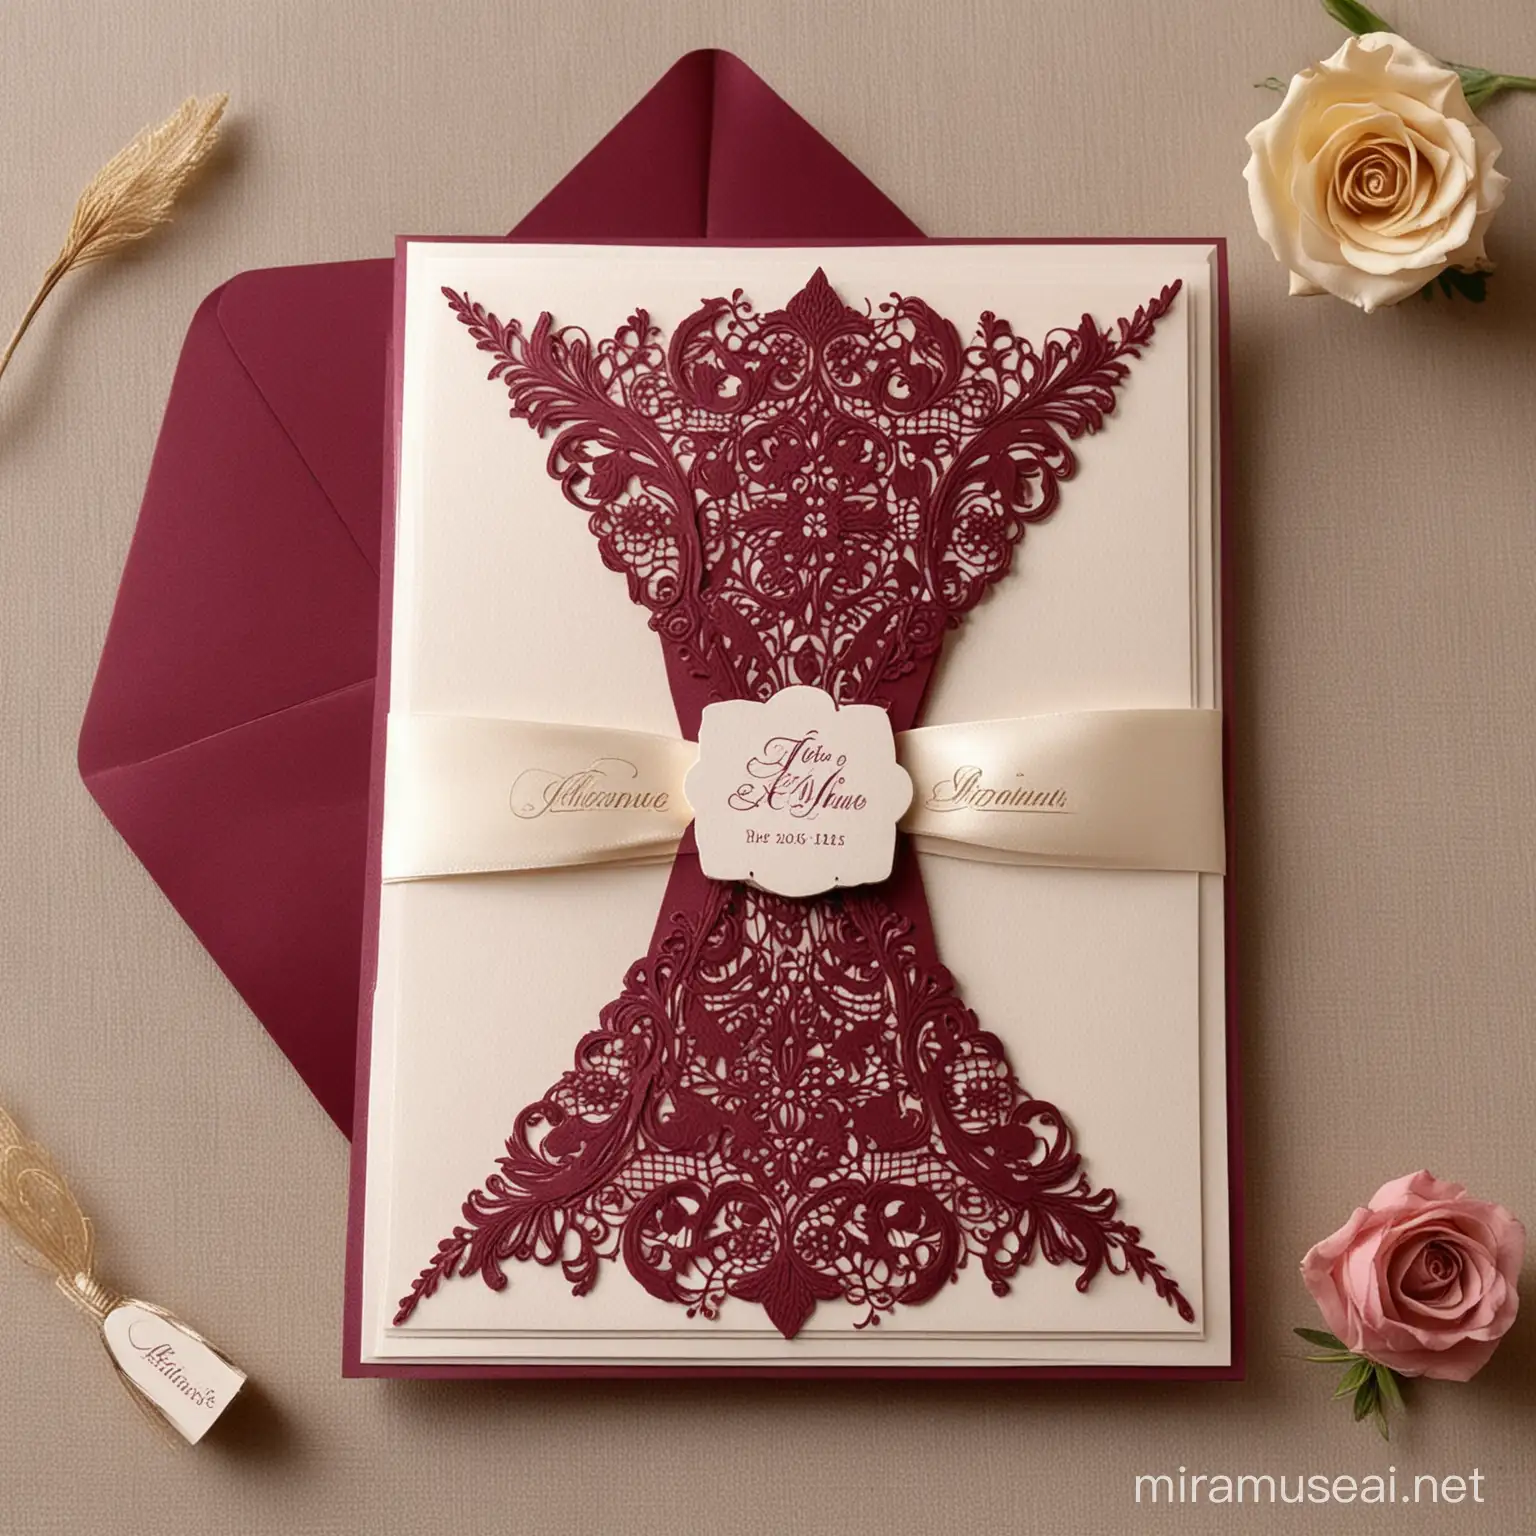 wedding invitation with colors burgundy and champagne